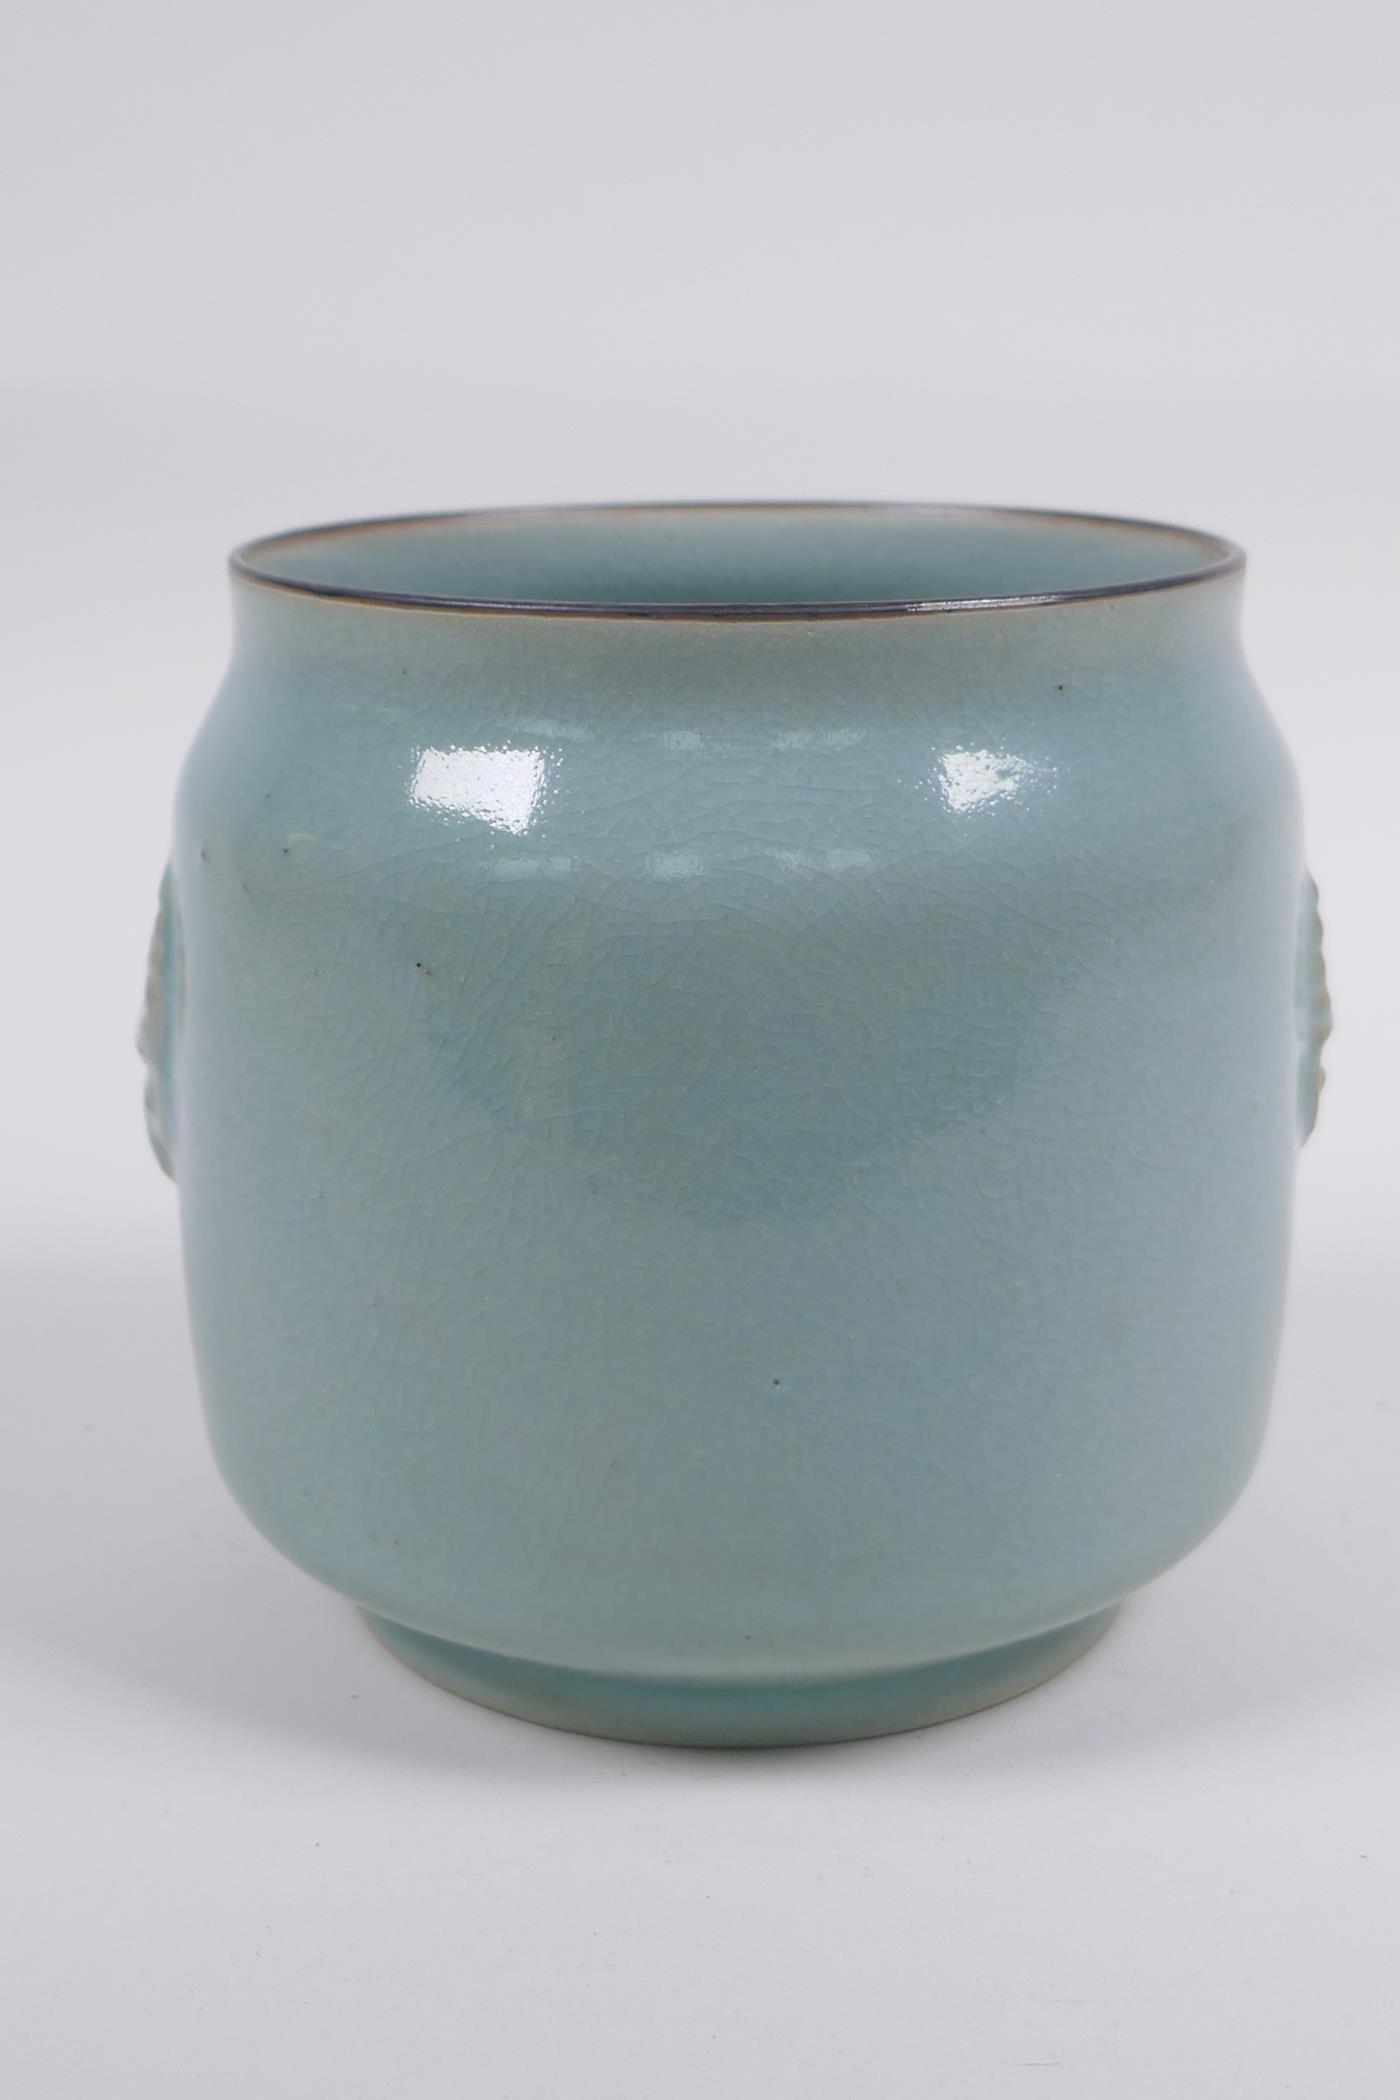 Chinese Ru ware style celadon glazed jar with twin mask decoration, 12cm high x 12cm diameter - Image 4 of 5